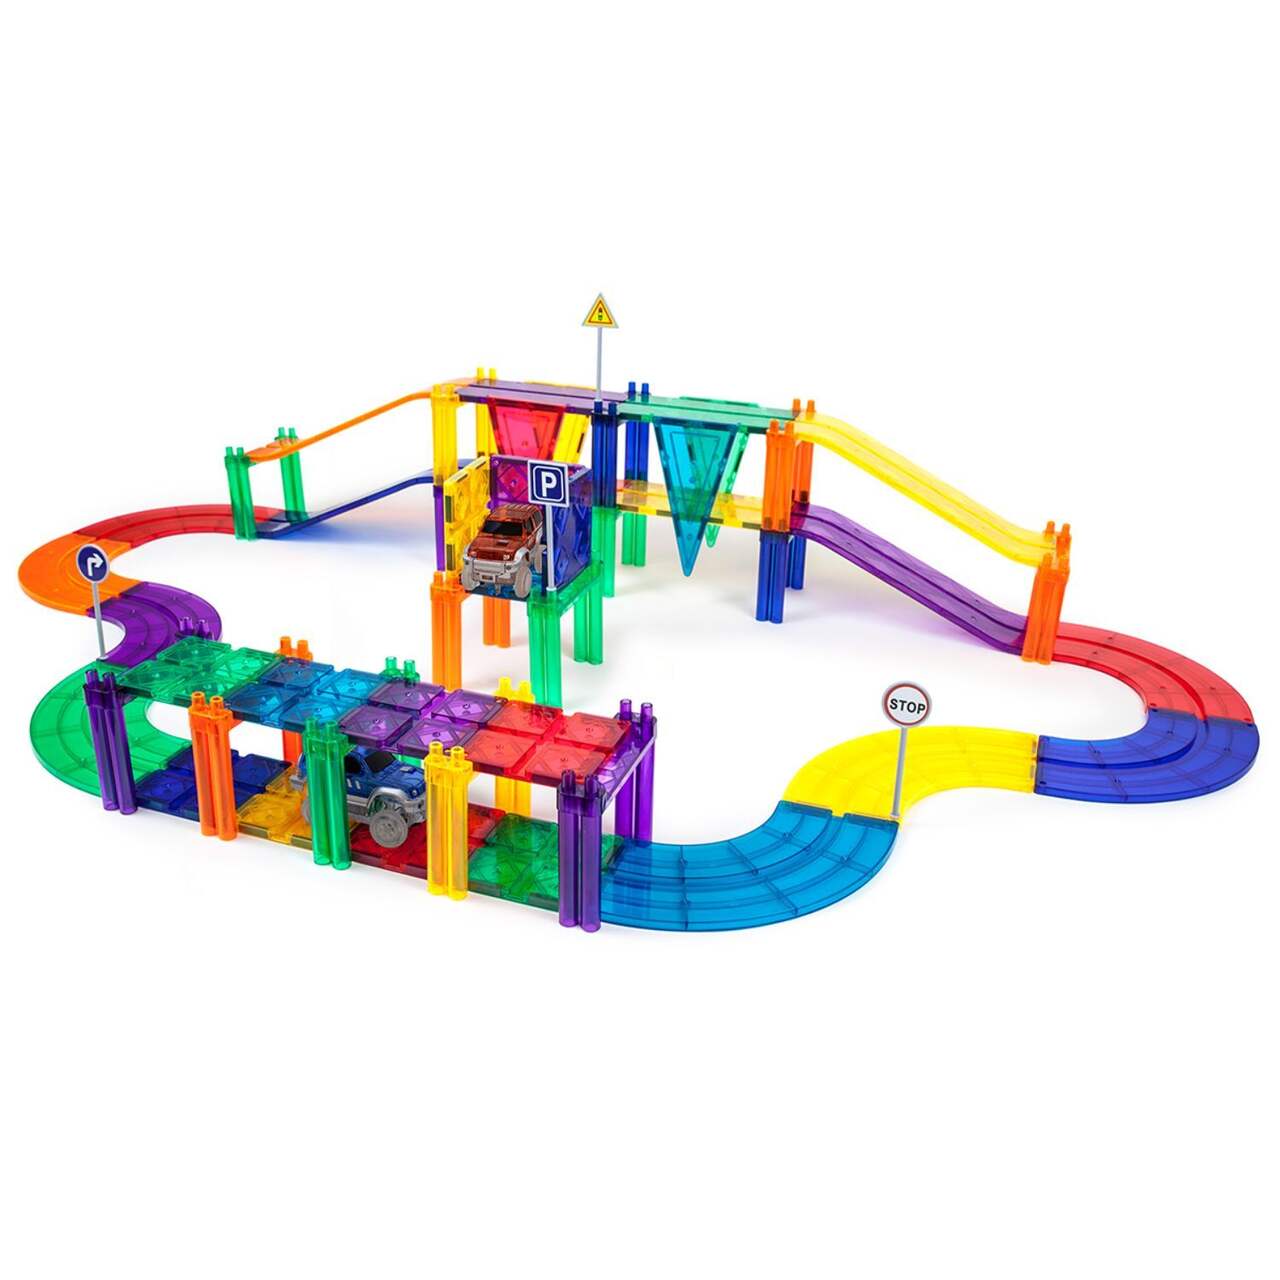 Picasso Tiles Magnetic Marble Run Building Blocks, 71-pc